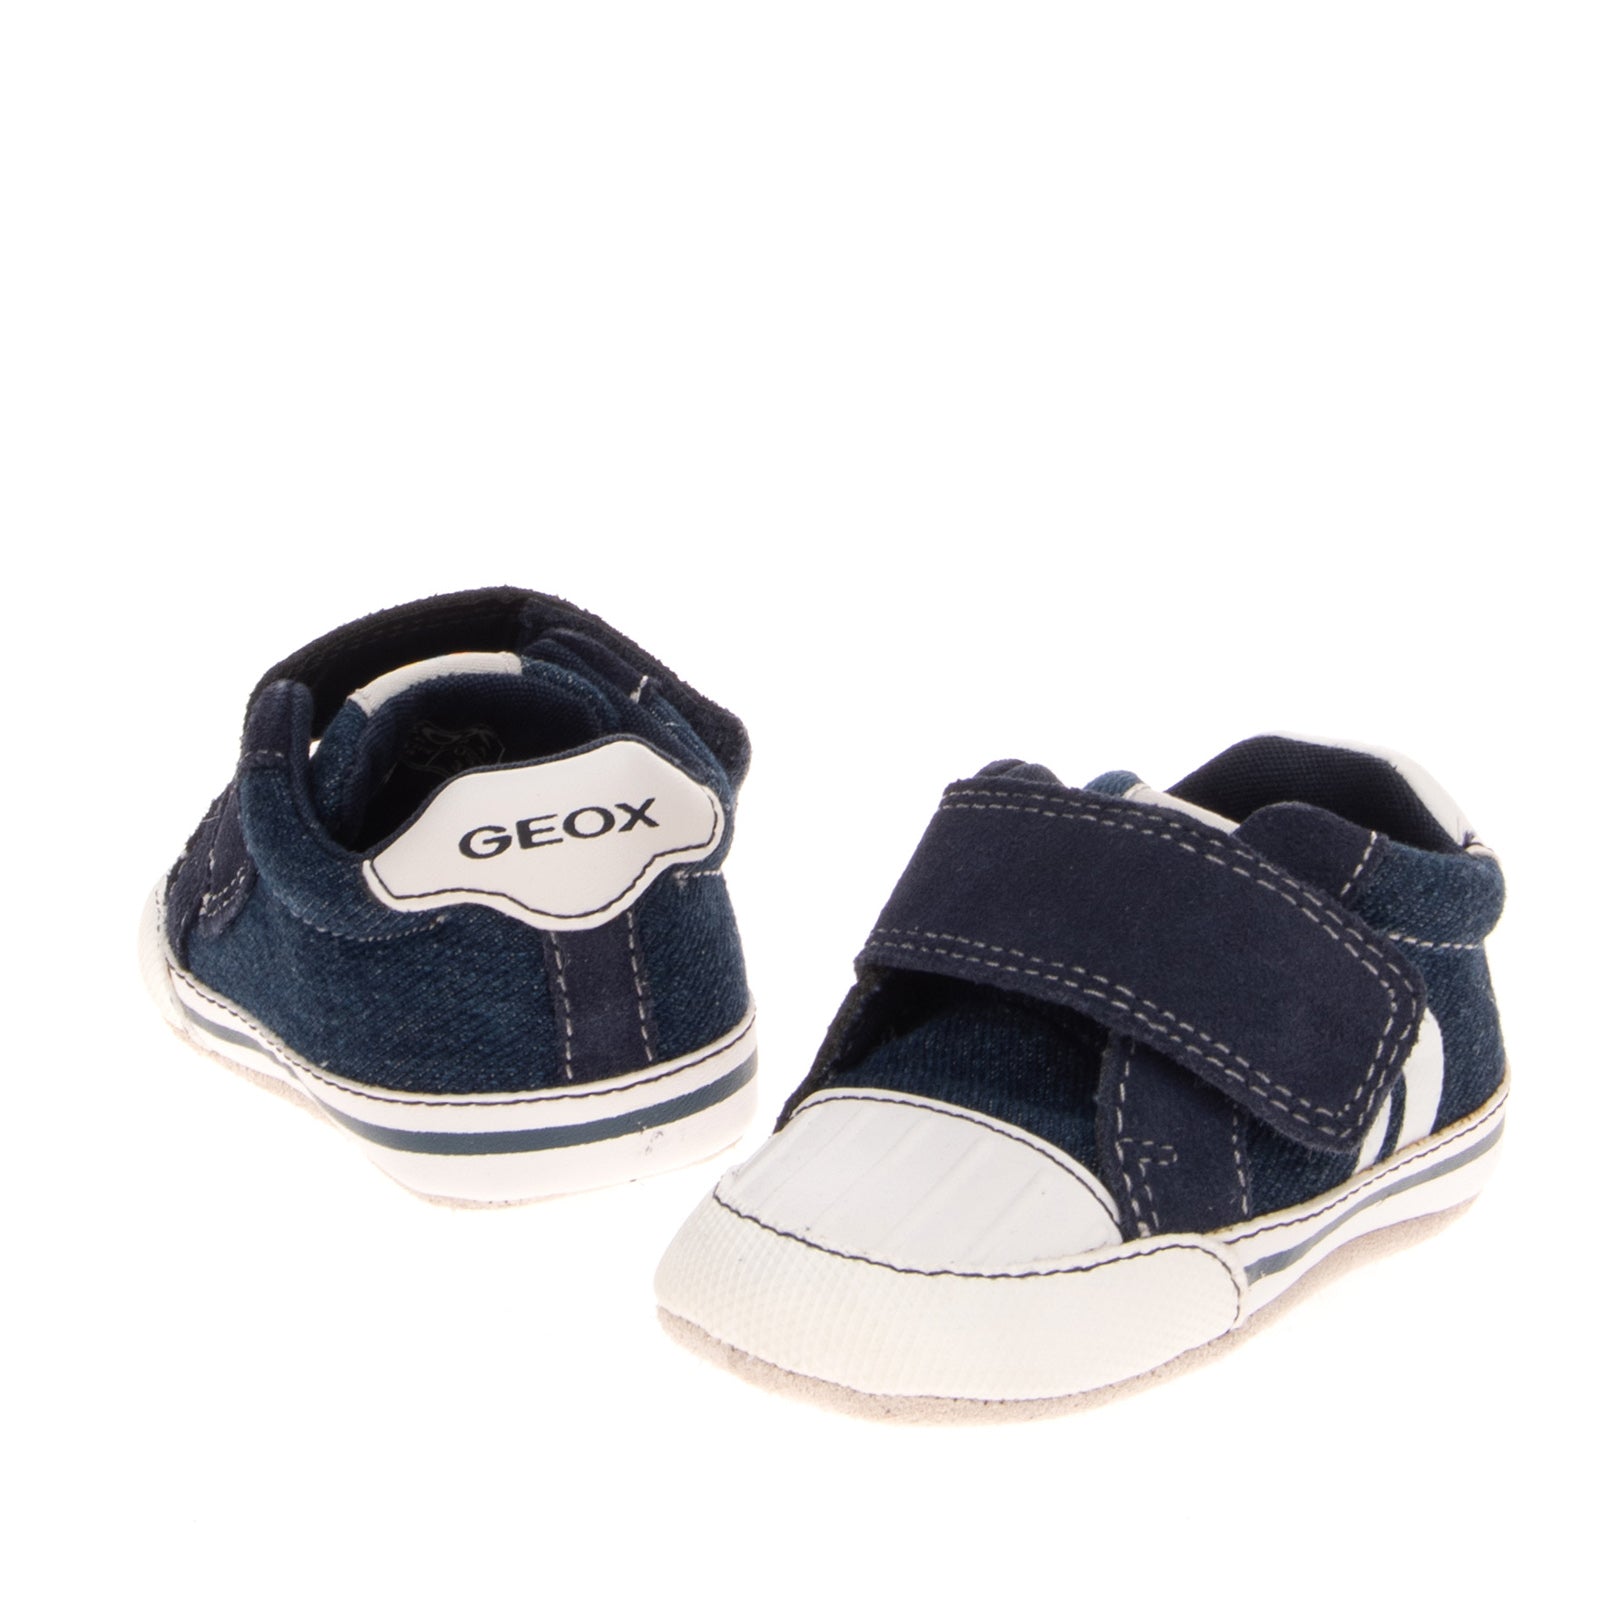 GEOX RESPIRA Baby Denim & Leather Sneakers Size 17 UK 1.5 US 2 Breathable Logo gallery main photo